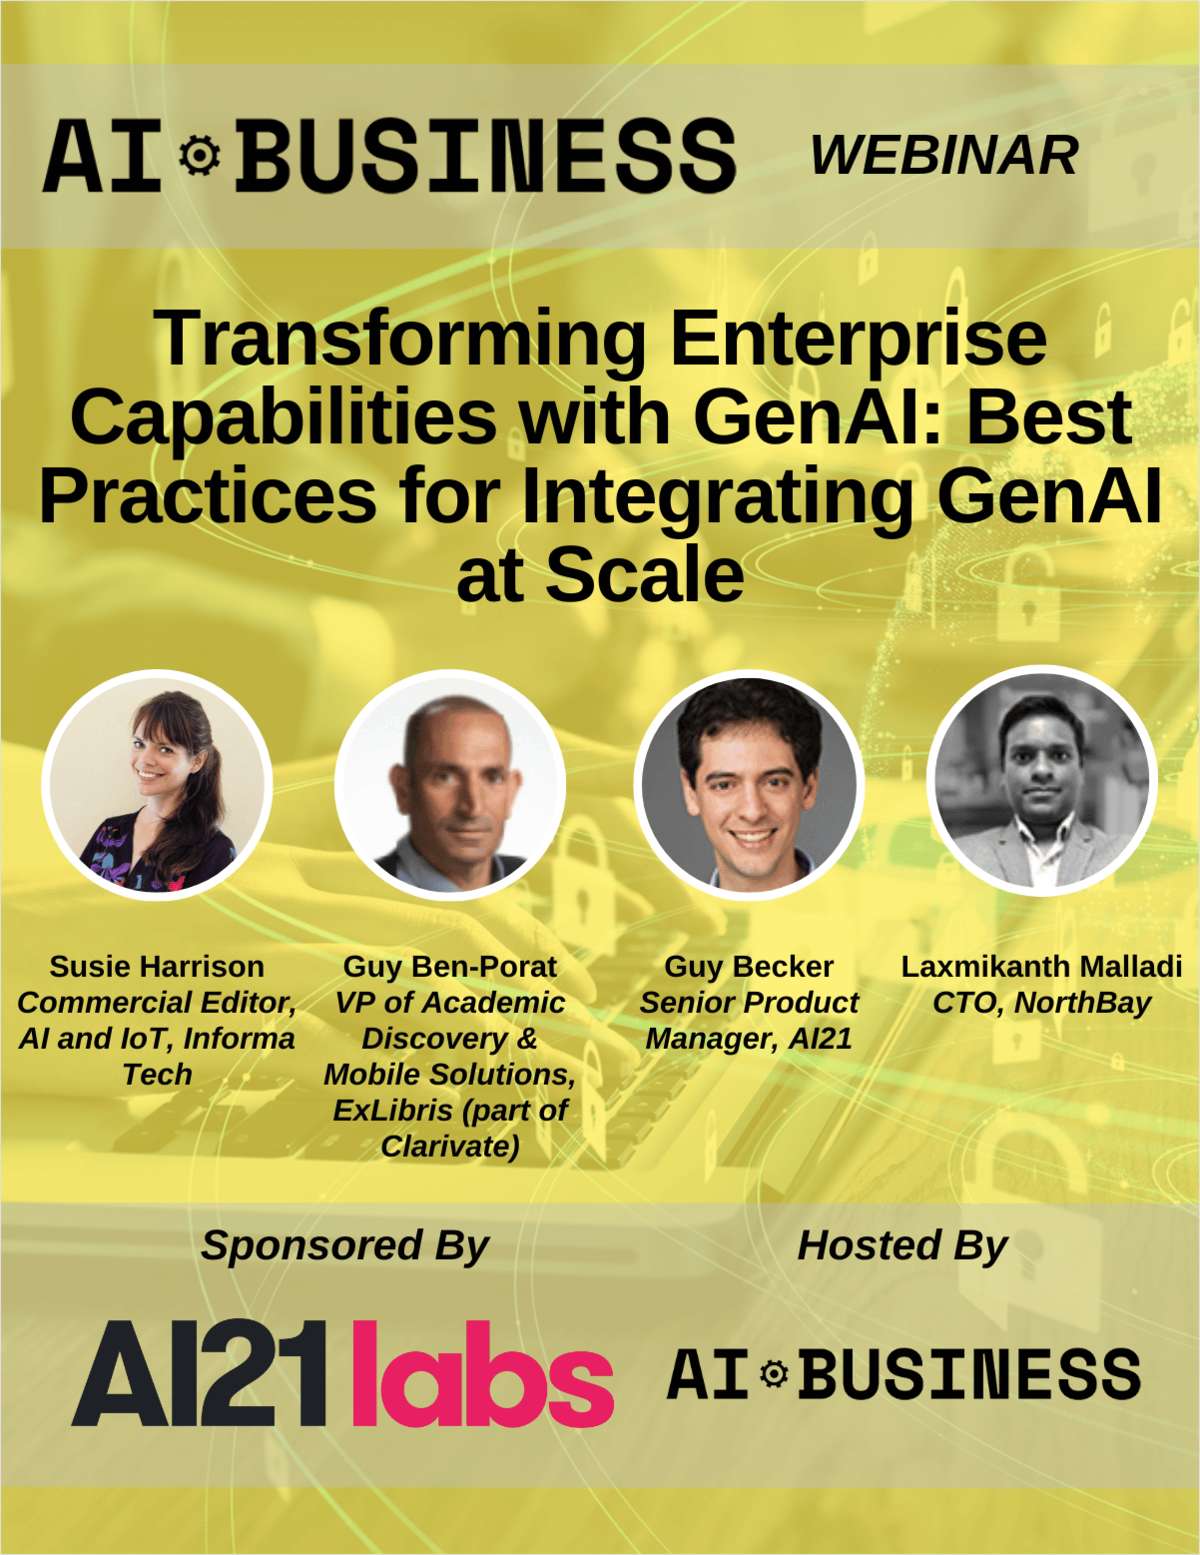 Transforming Enterprise Capabilities with GenAI: Best Practices for Integrating GenAI at Scale